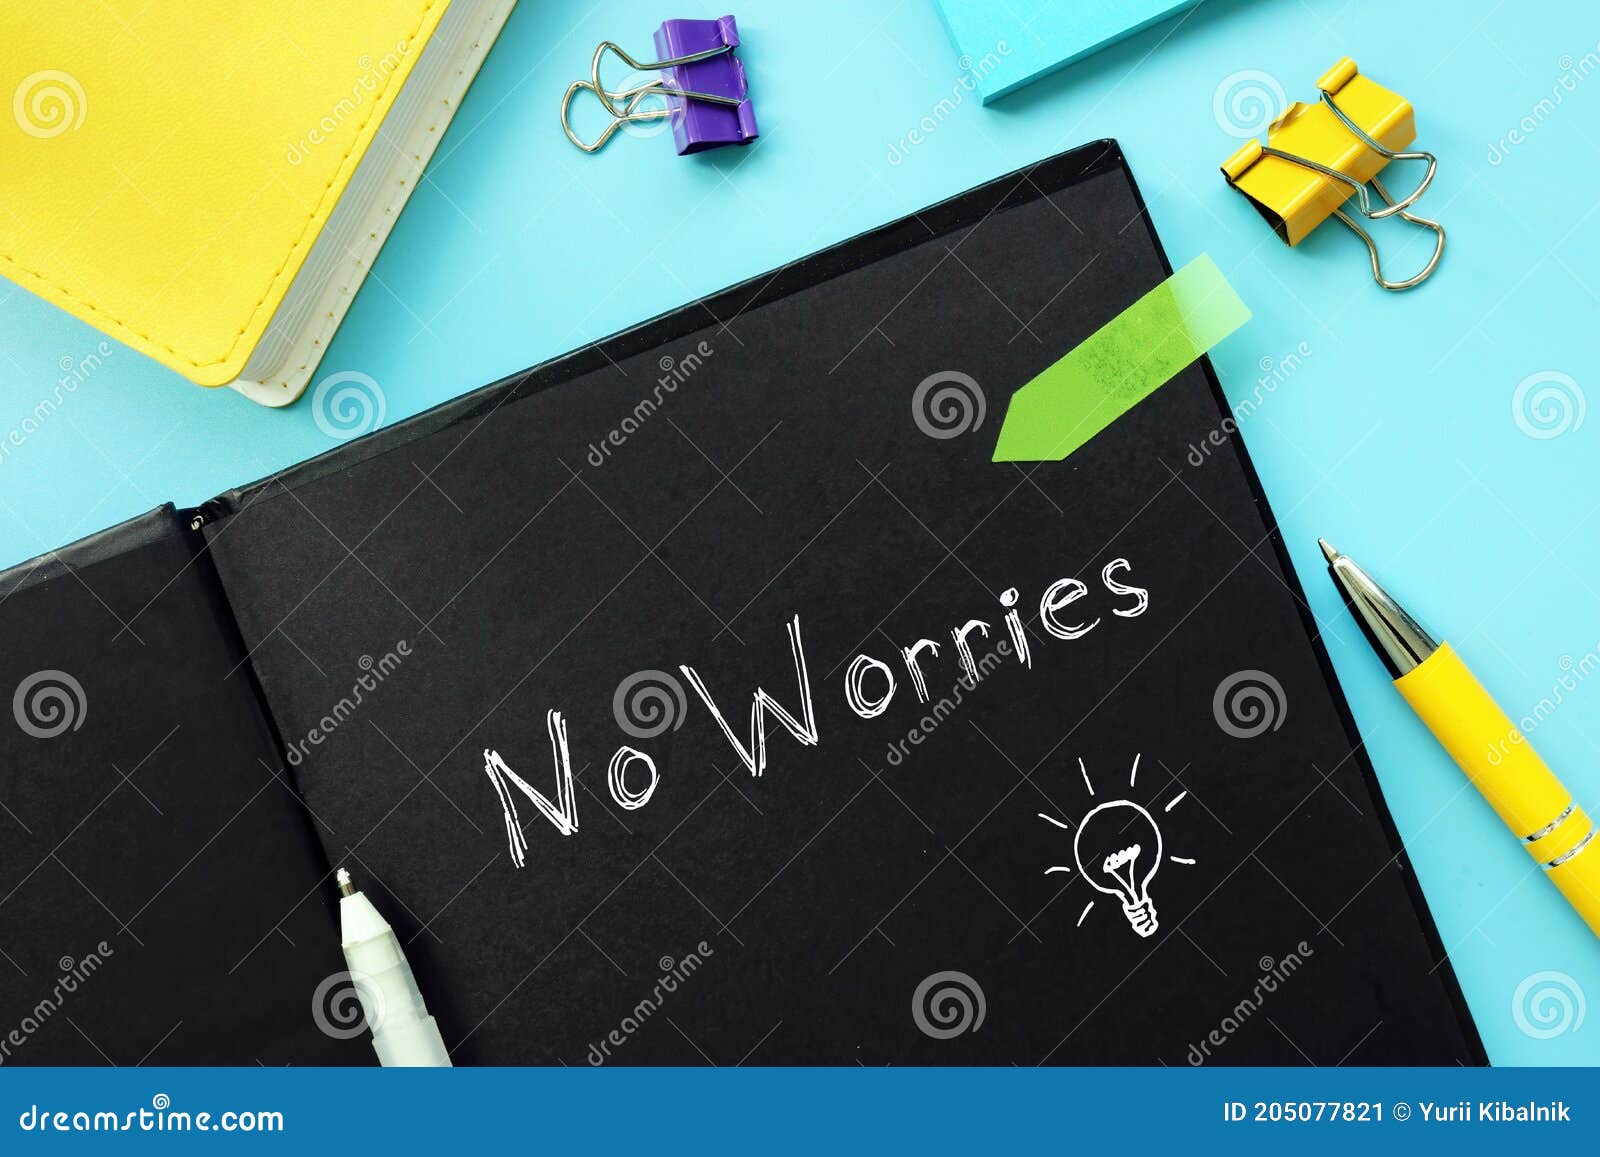 412 No Worries Photos Free Royalty Free Stock Photos From Dreamstime